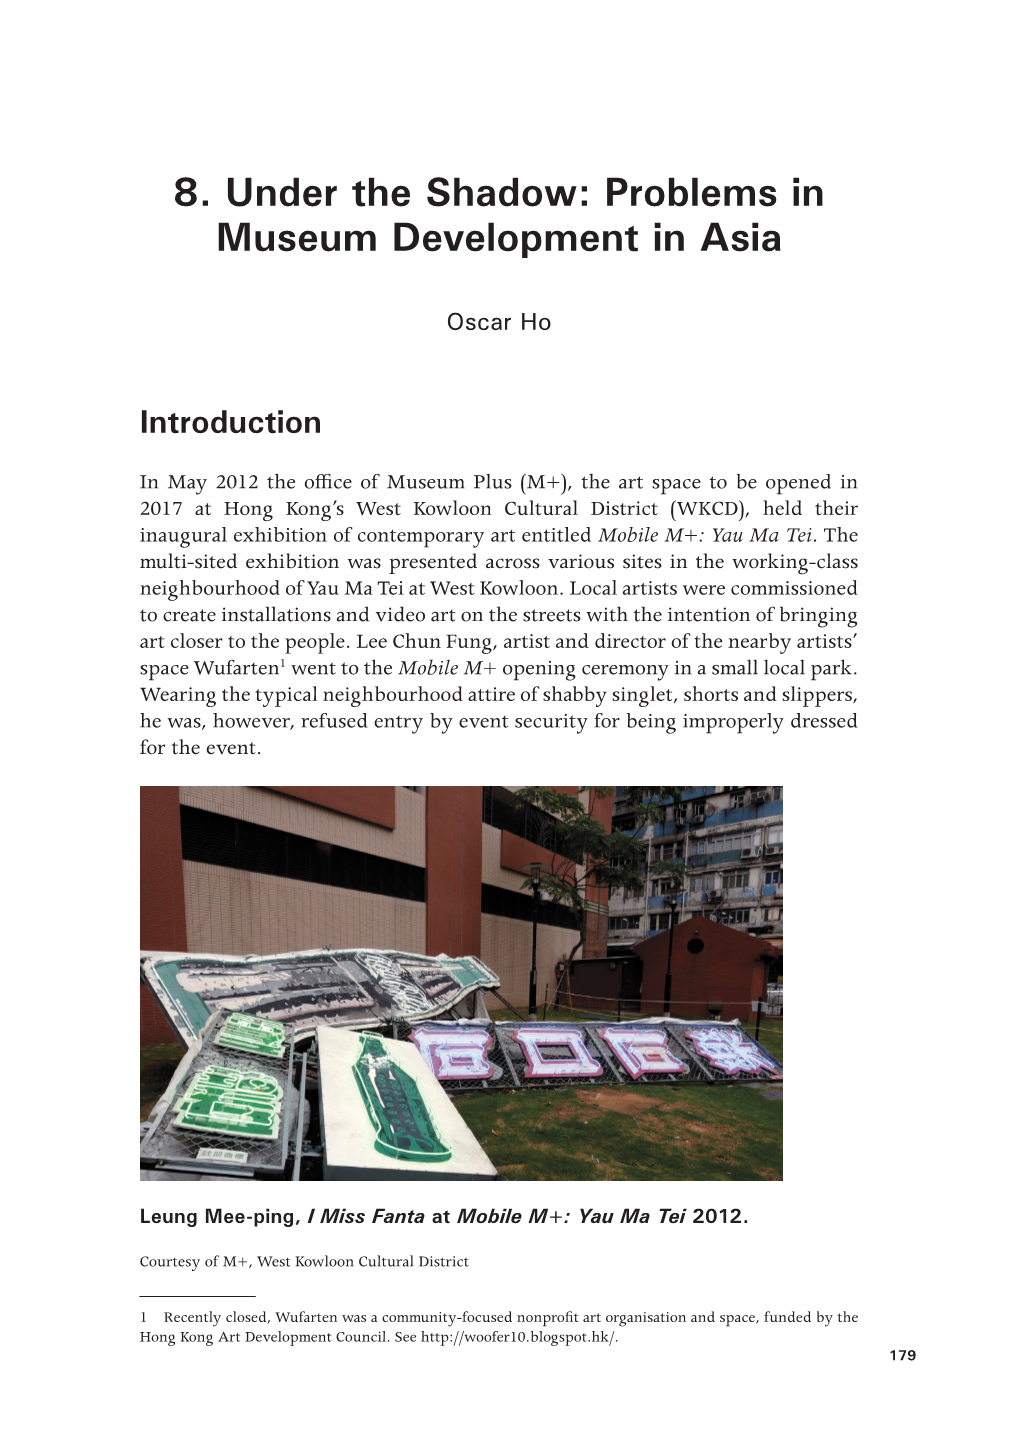 8. Under the Shadow: Problems in Museum Development in Asia